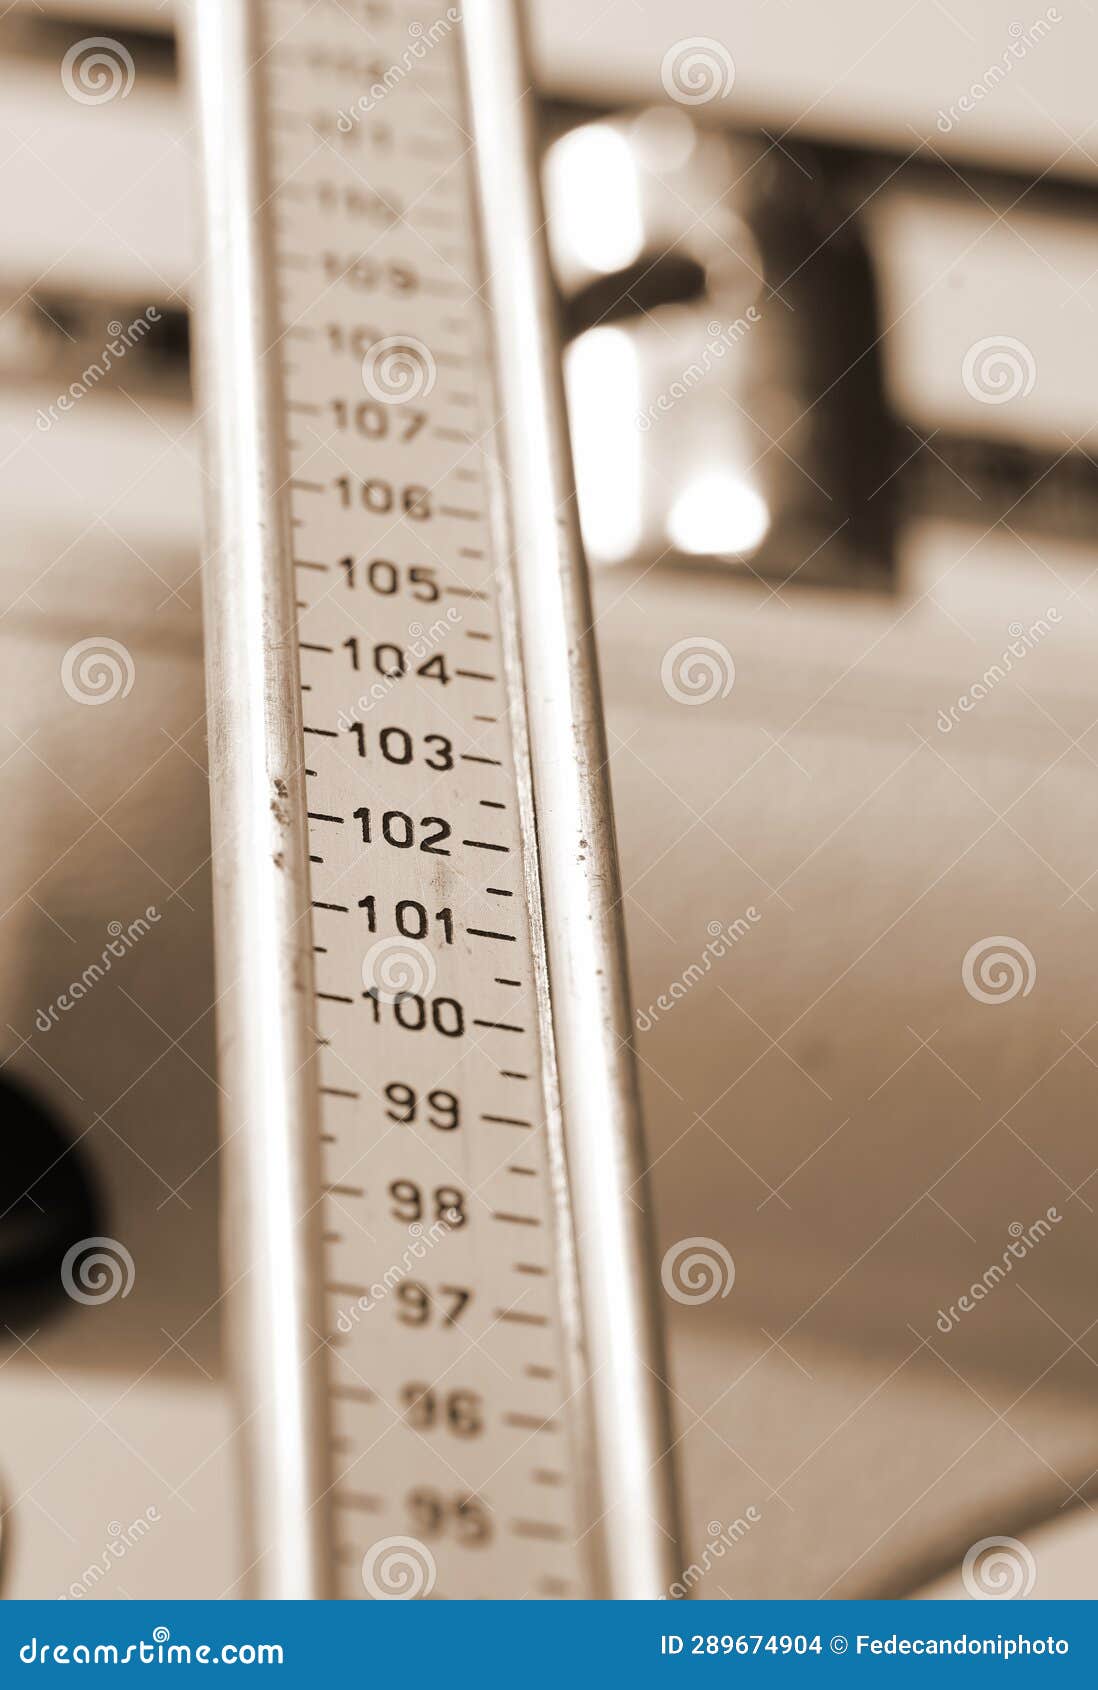 https://thumbs.dreamstime.com/z/graduated-rod-bathroom-scales-pediatrician-s-office-to-measure-height-children-sepia-effect-graduated-rod-289674904.jpg